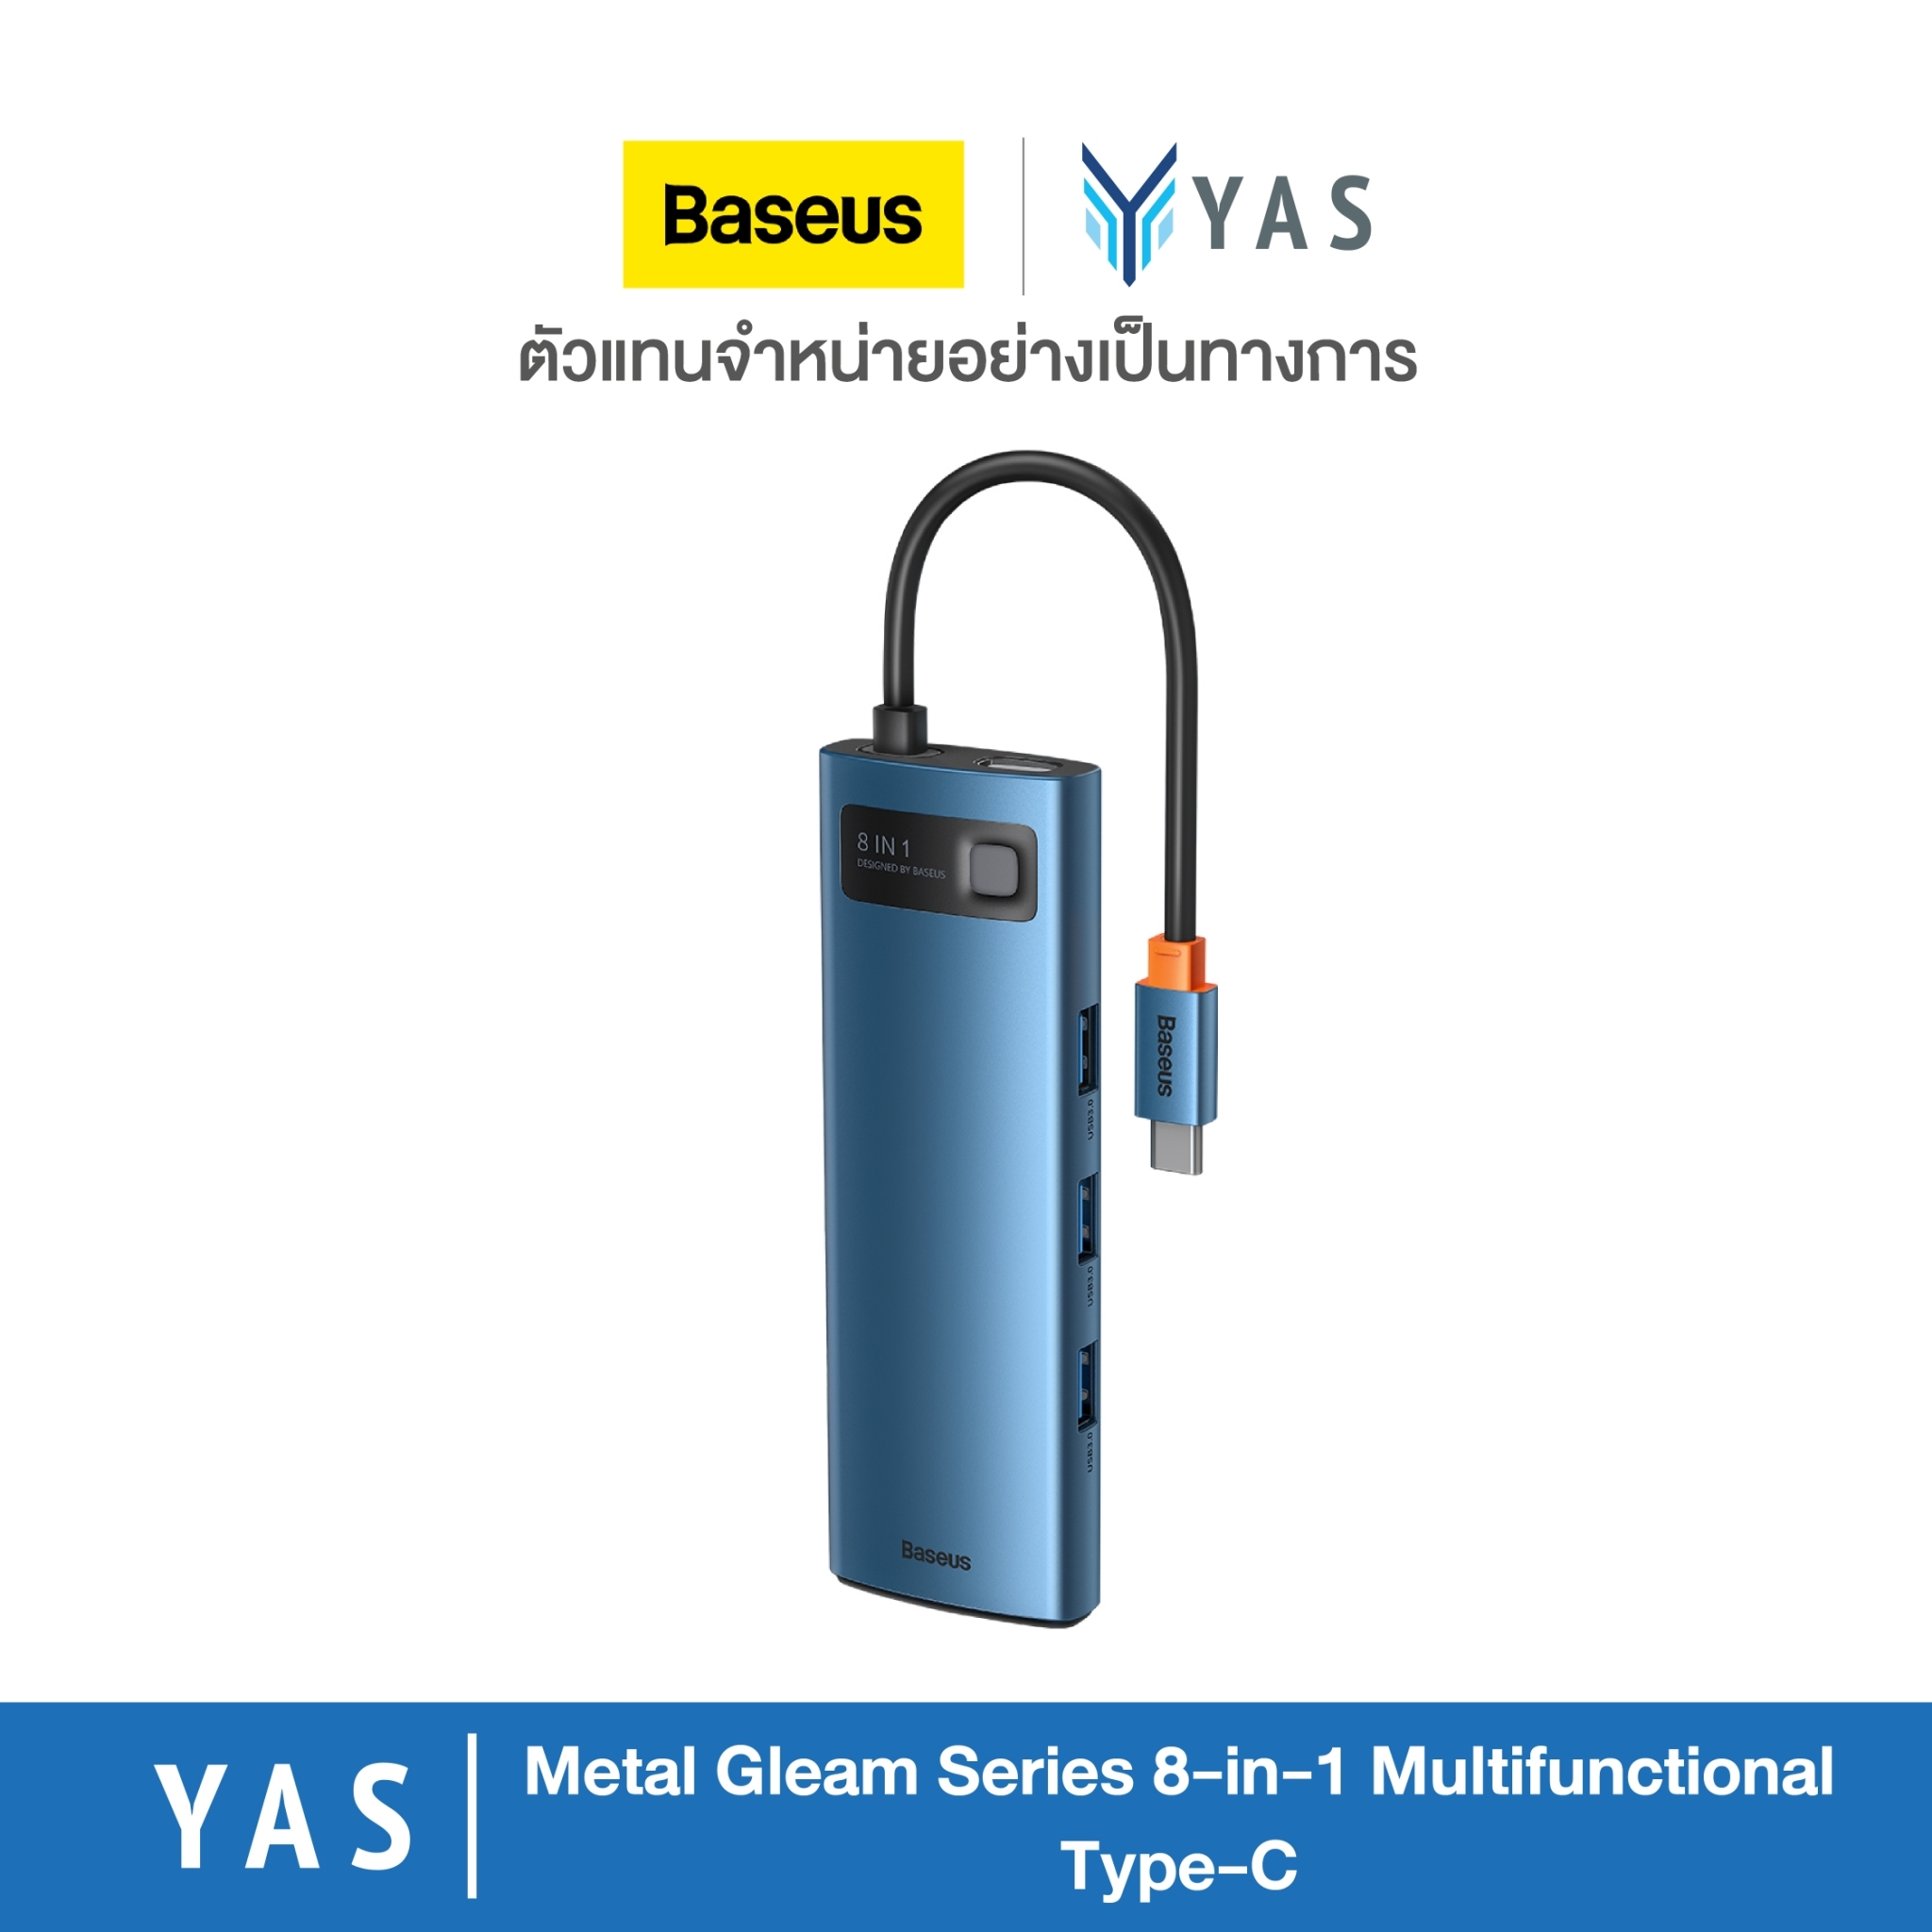 Baseus Metal Gleam Series 8-in-1 Multifunctional | Type-C | Blue | รับประกัน 2 ปี